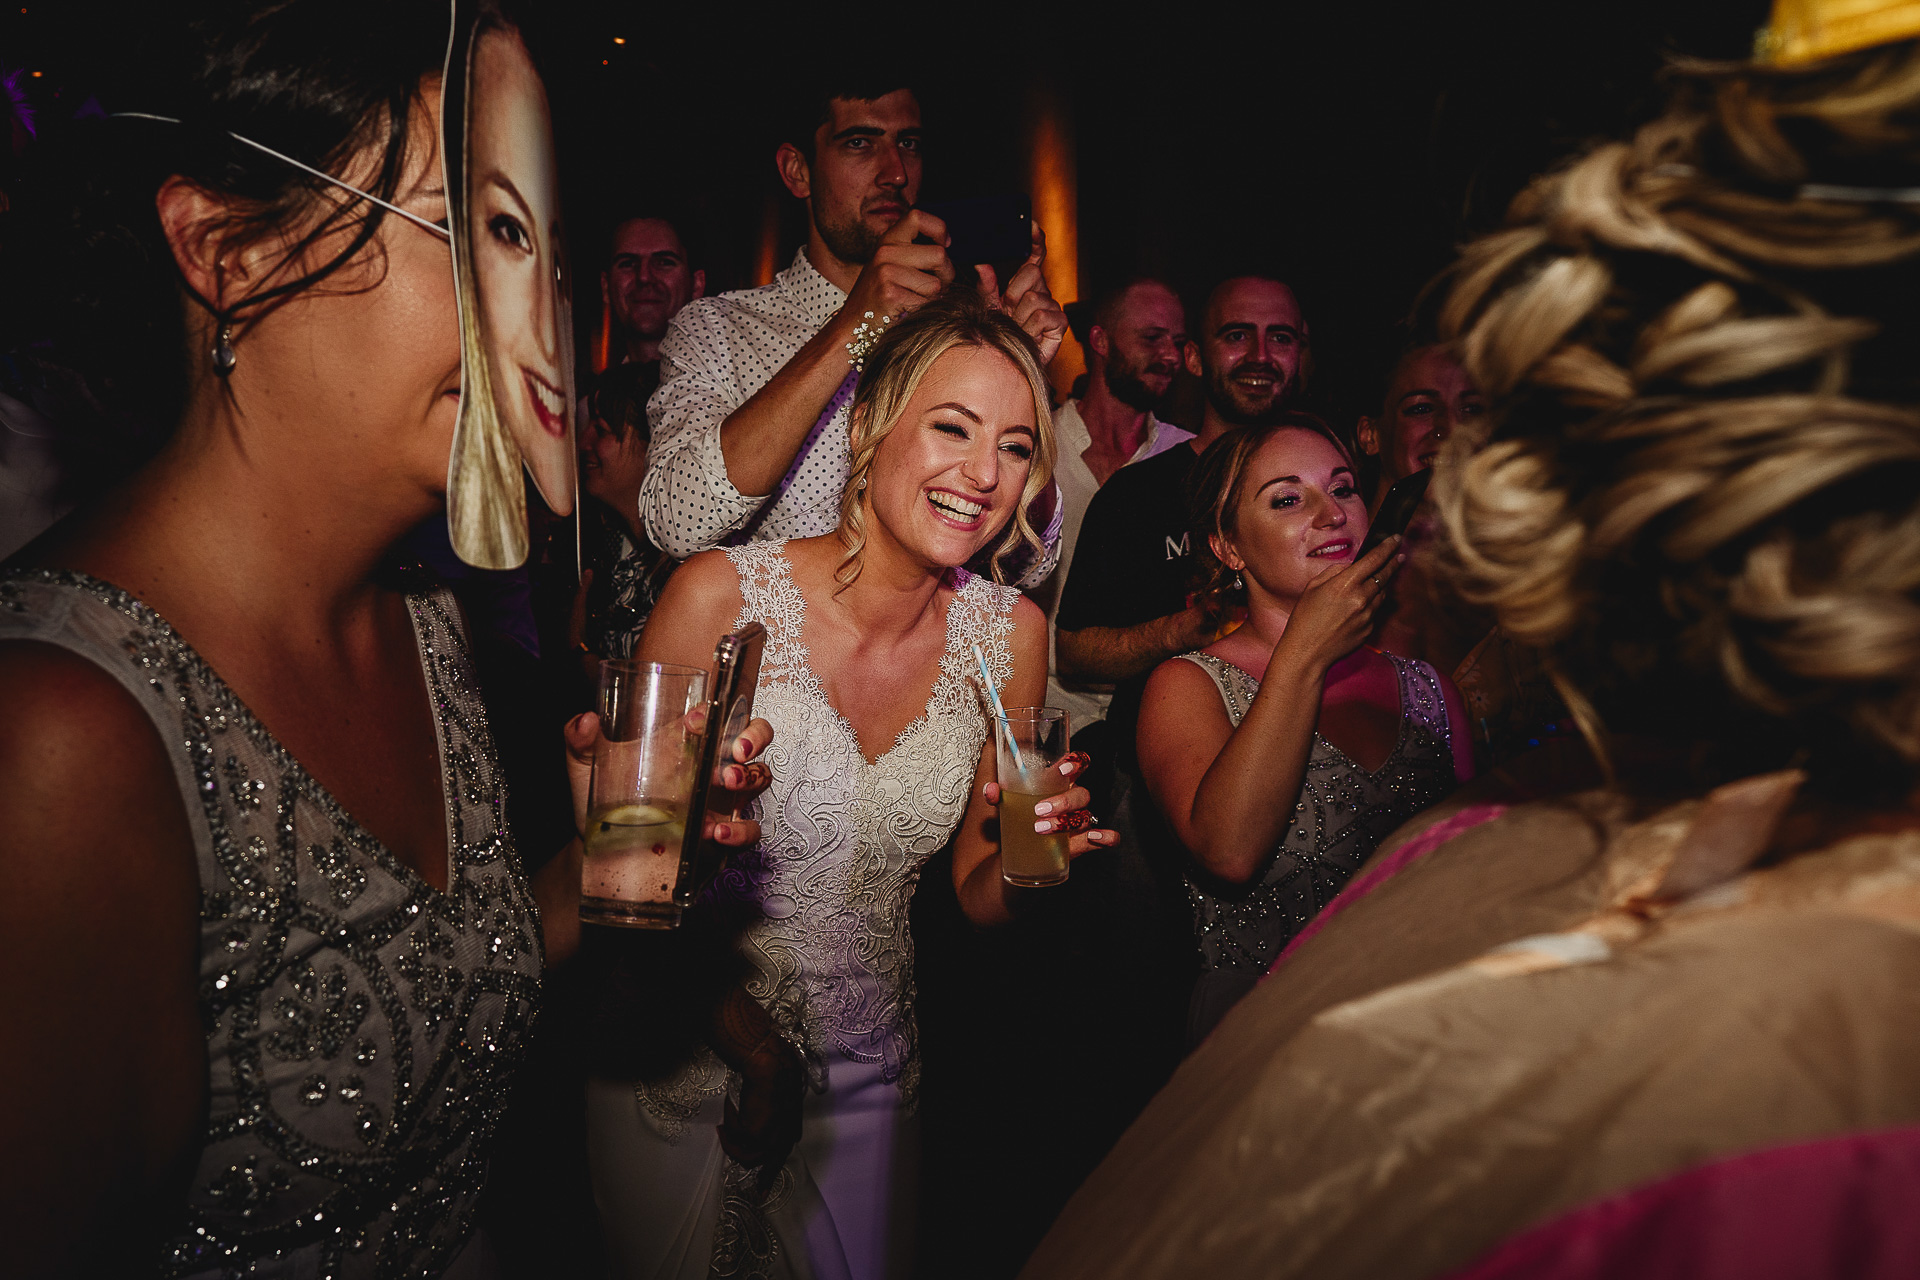 Bride laughing amongst other people on the dance floor